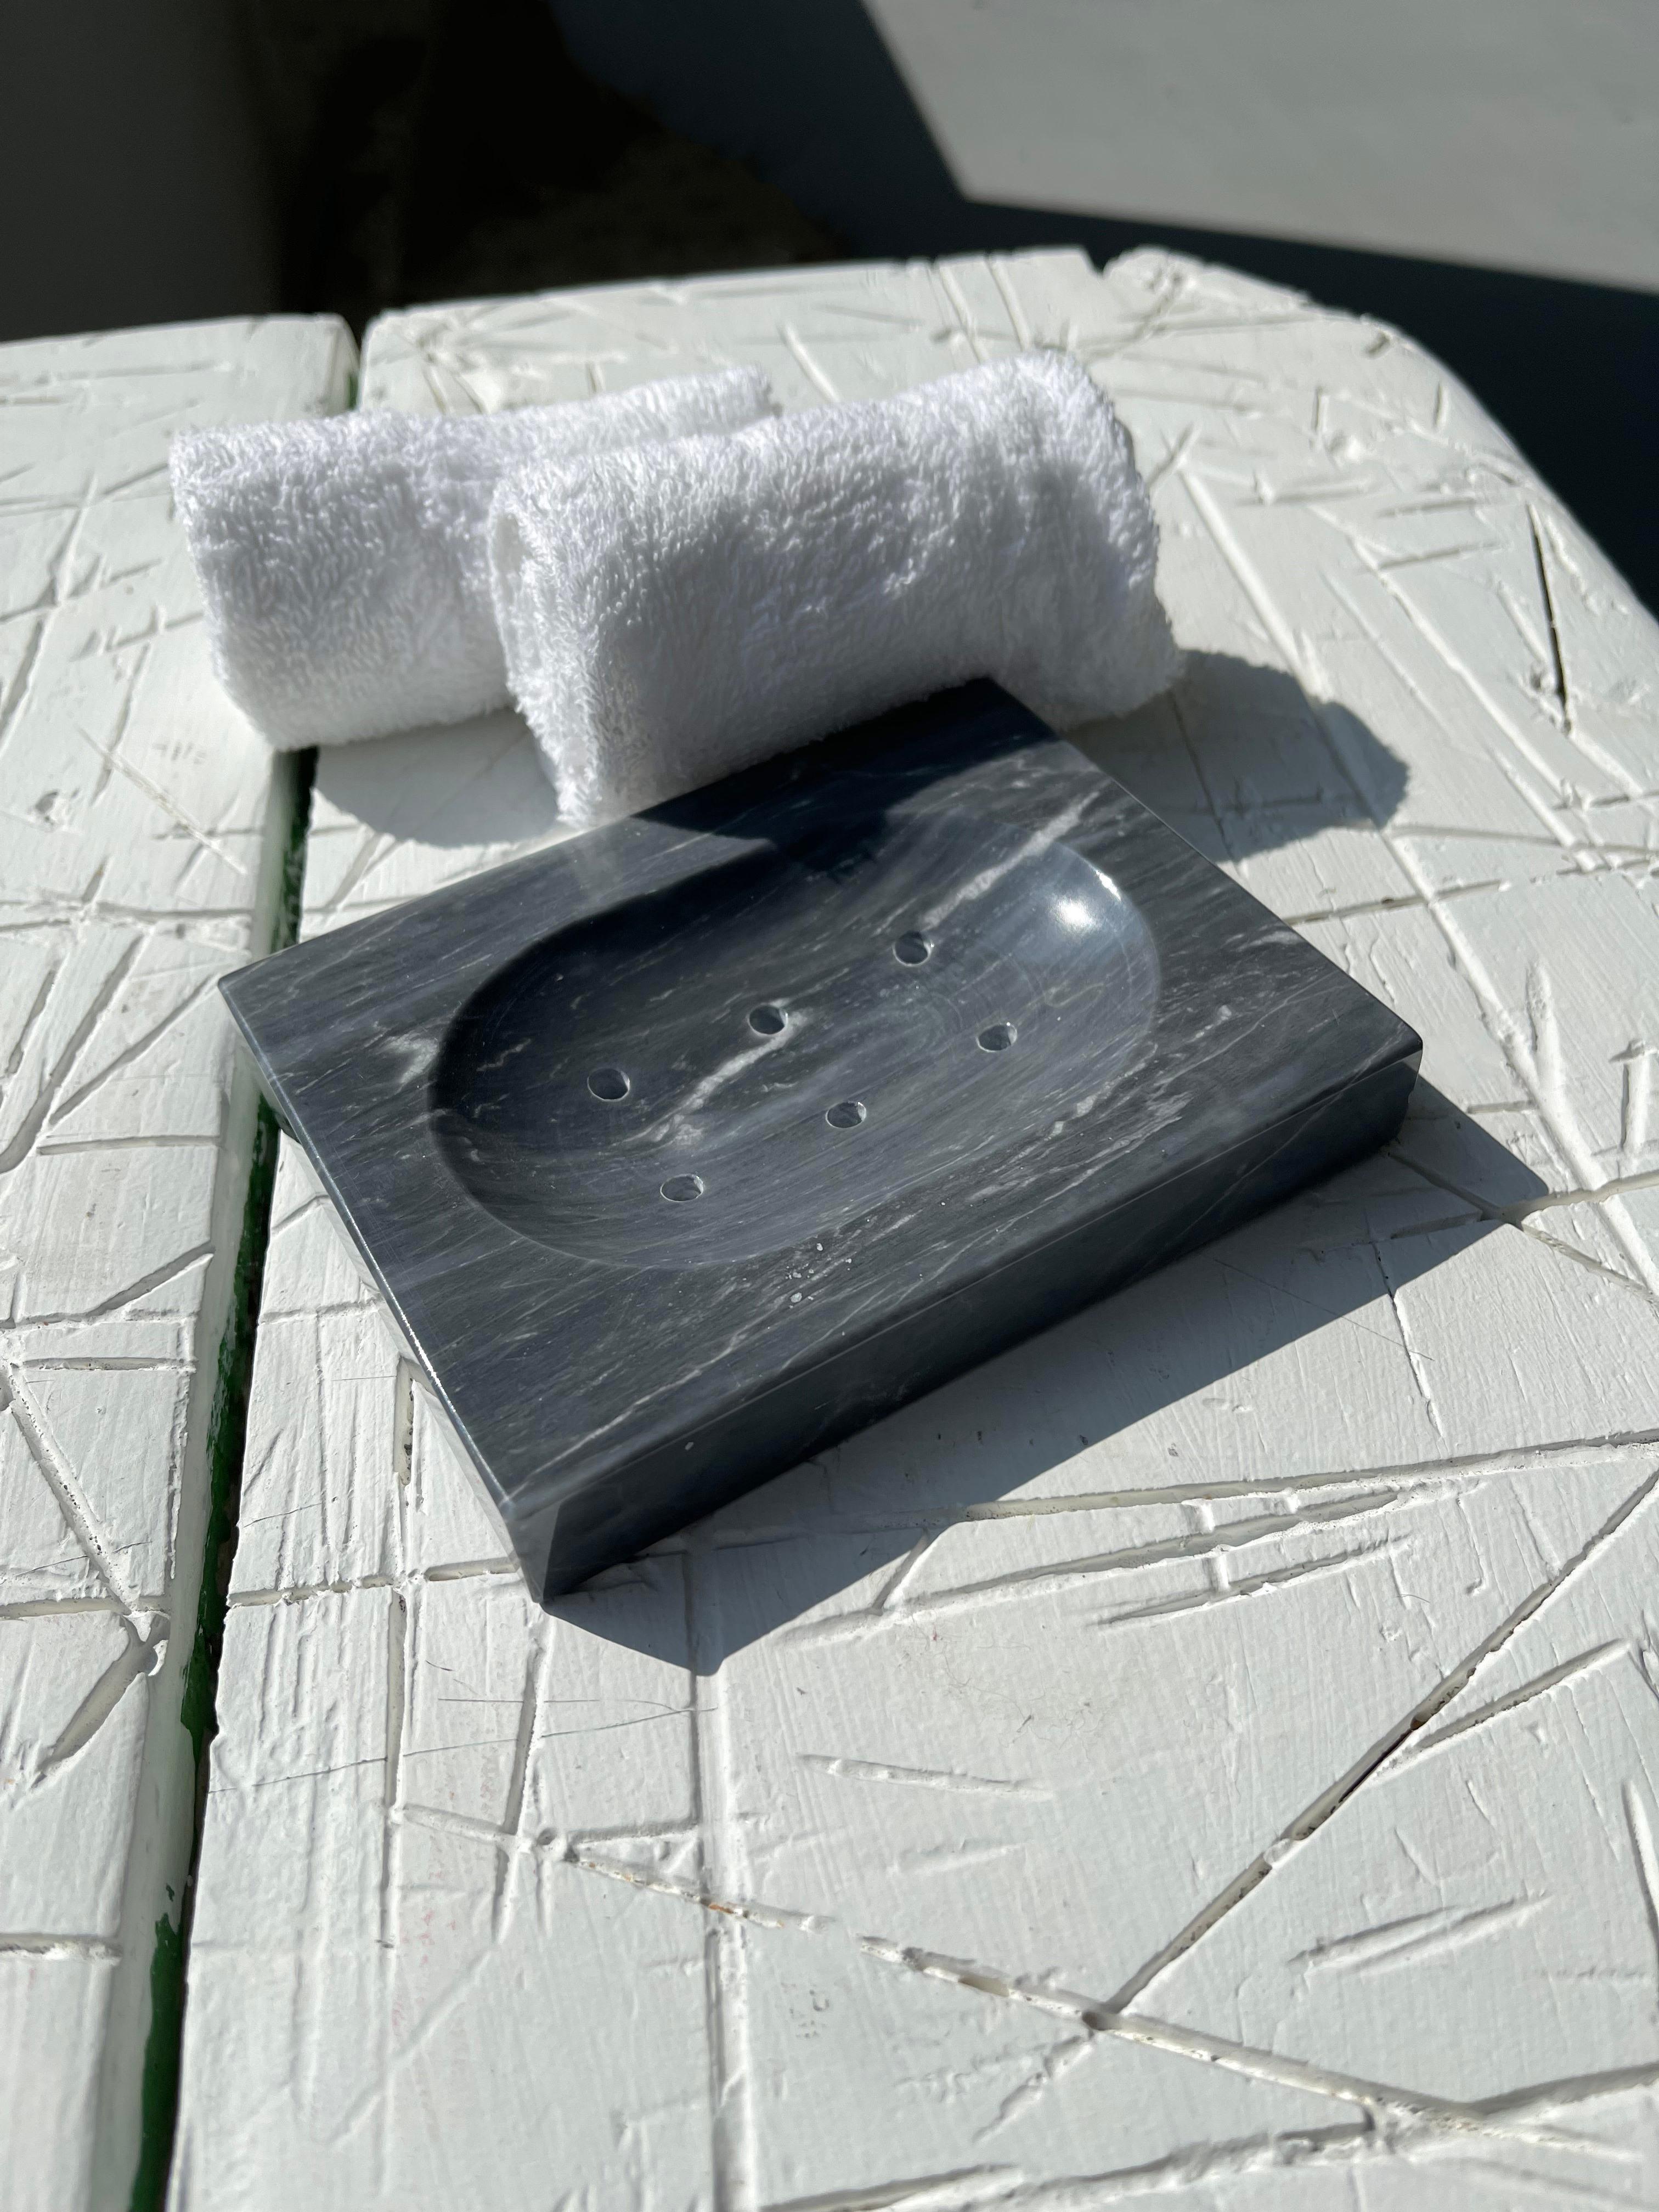 Squared soap dish in grey Bardiglio marble with little holes for water.

Each piece is in a way unique (since each marble block is different in veins and shades) and handcrafted in Italy. Slight variations in shape, color and size are to be